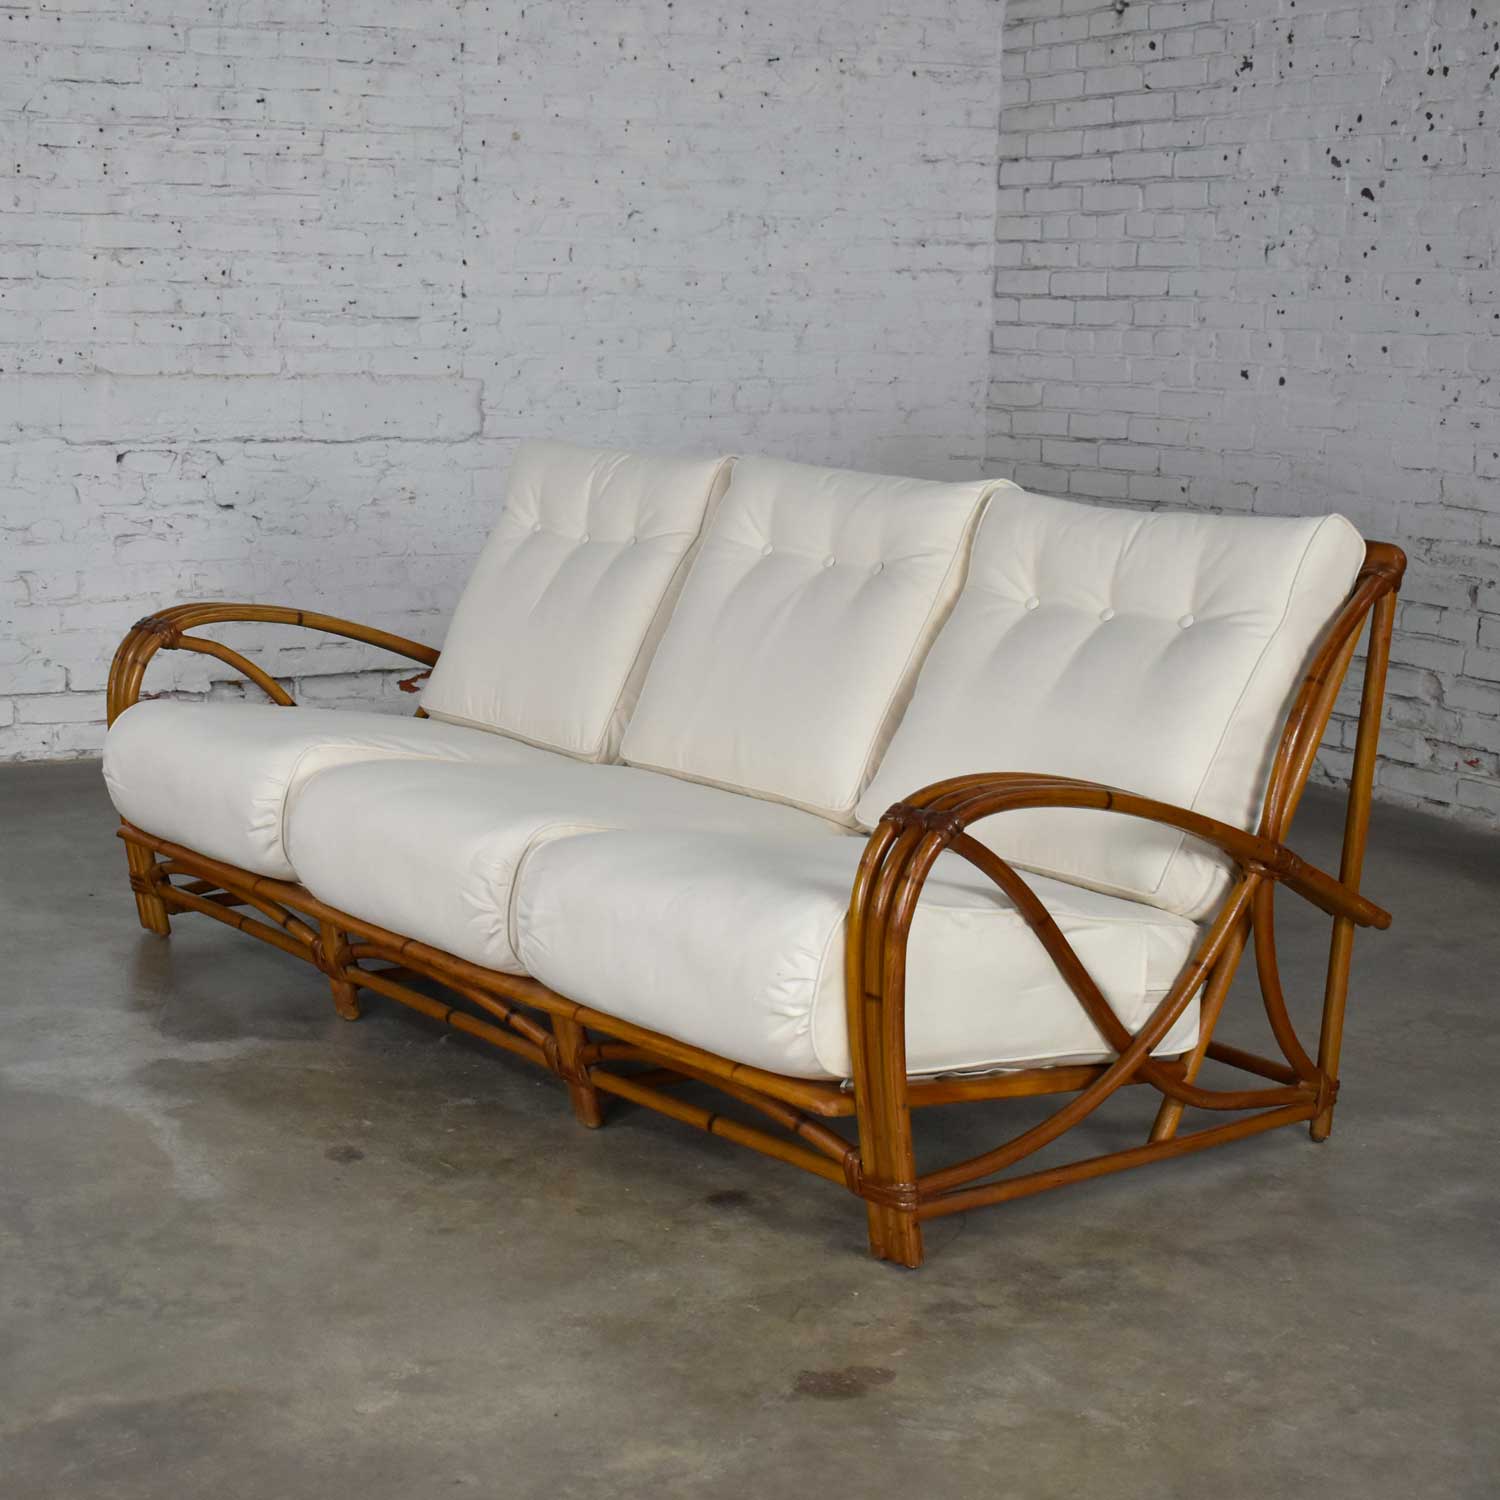 Vintage Heywood Wakefield Rattan Sofa New Off-White Canvas Upholstery